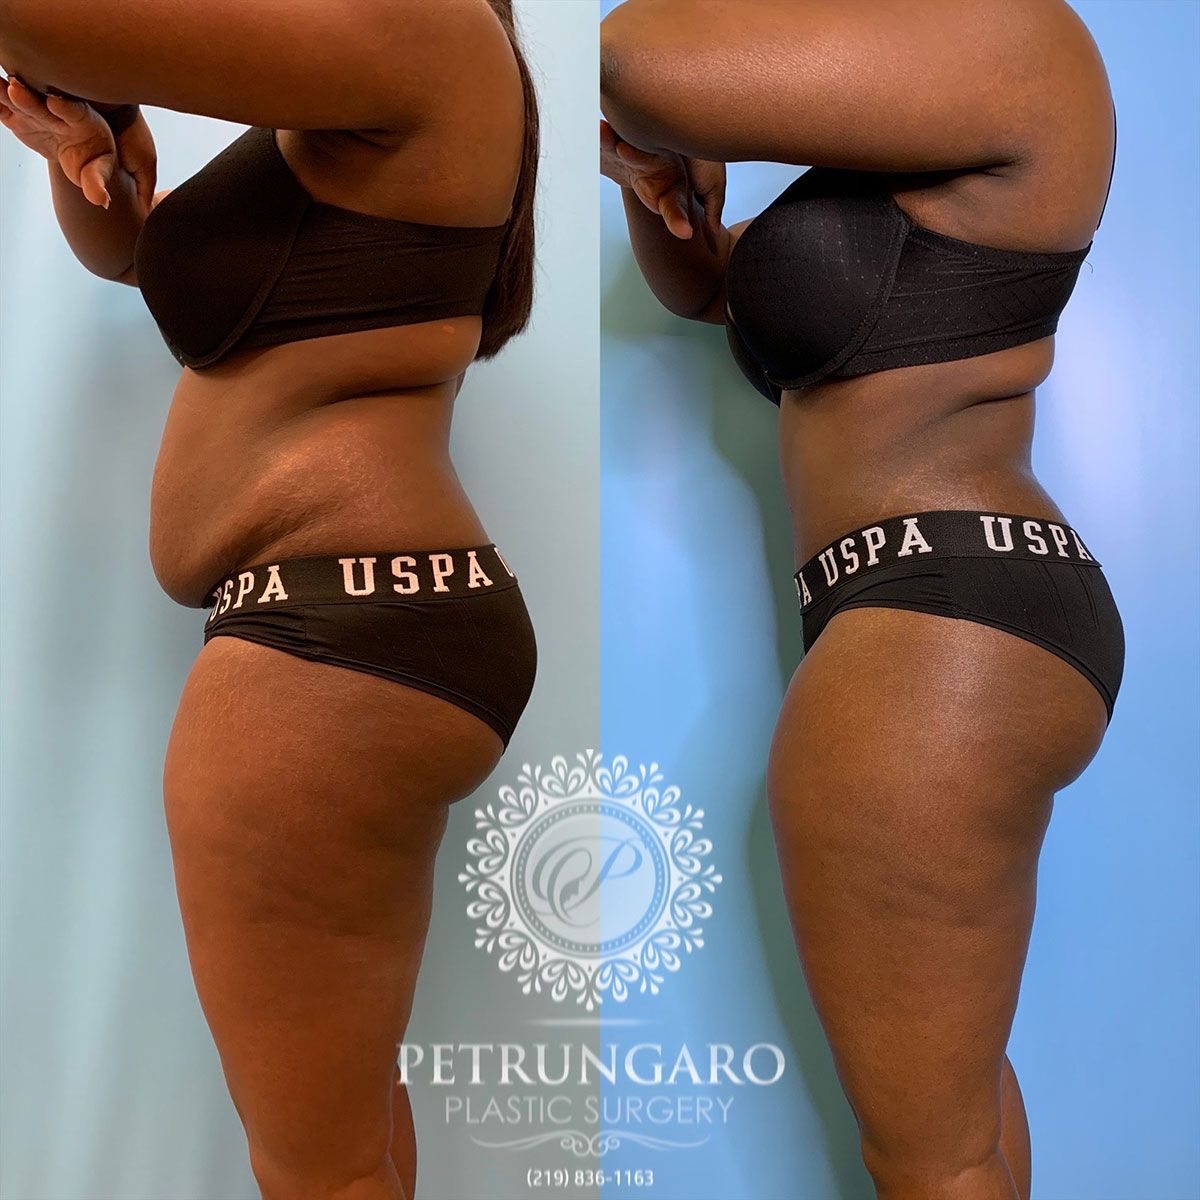 30 year old woman 3 months after tummy tuck with Lipo 360-2